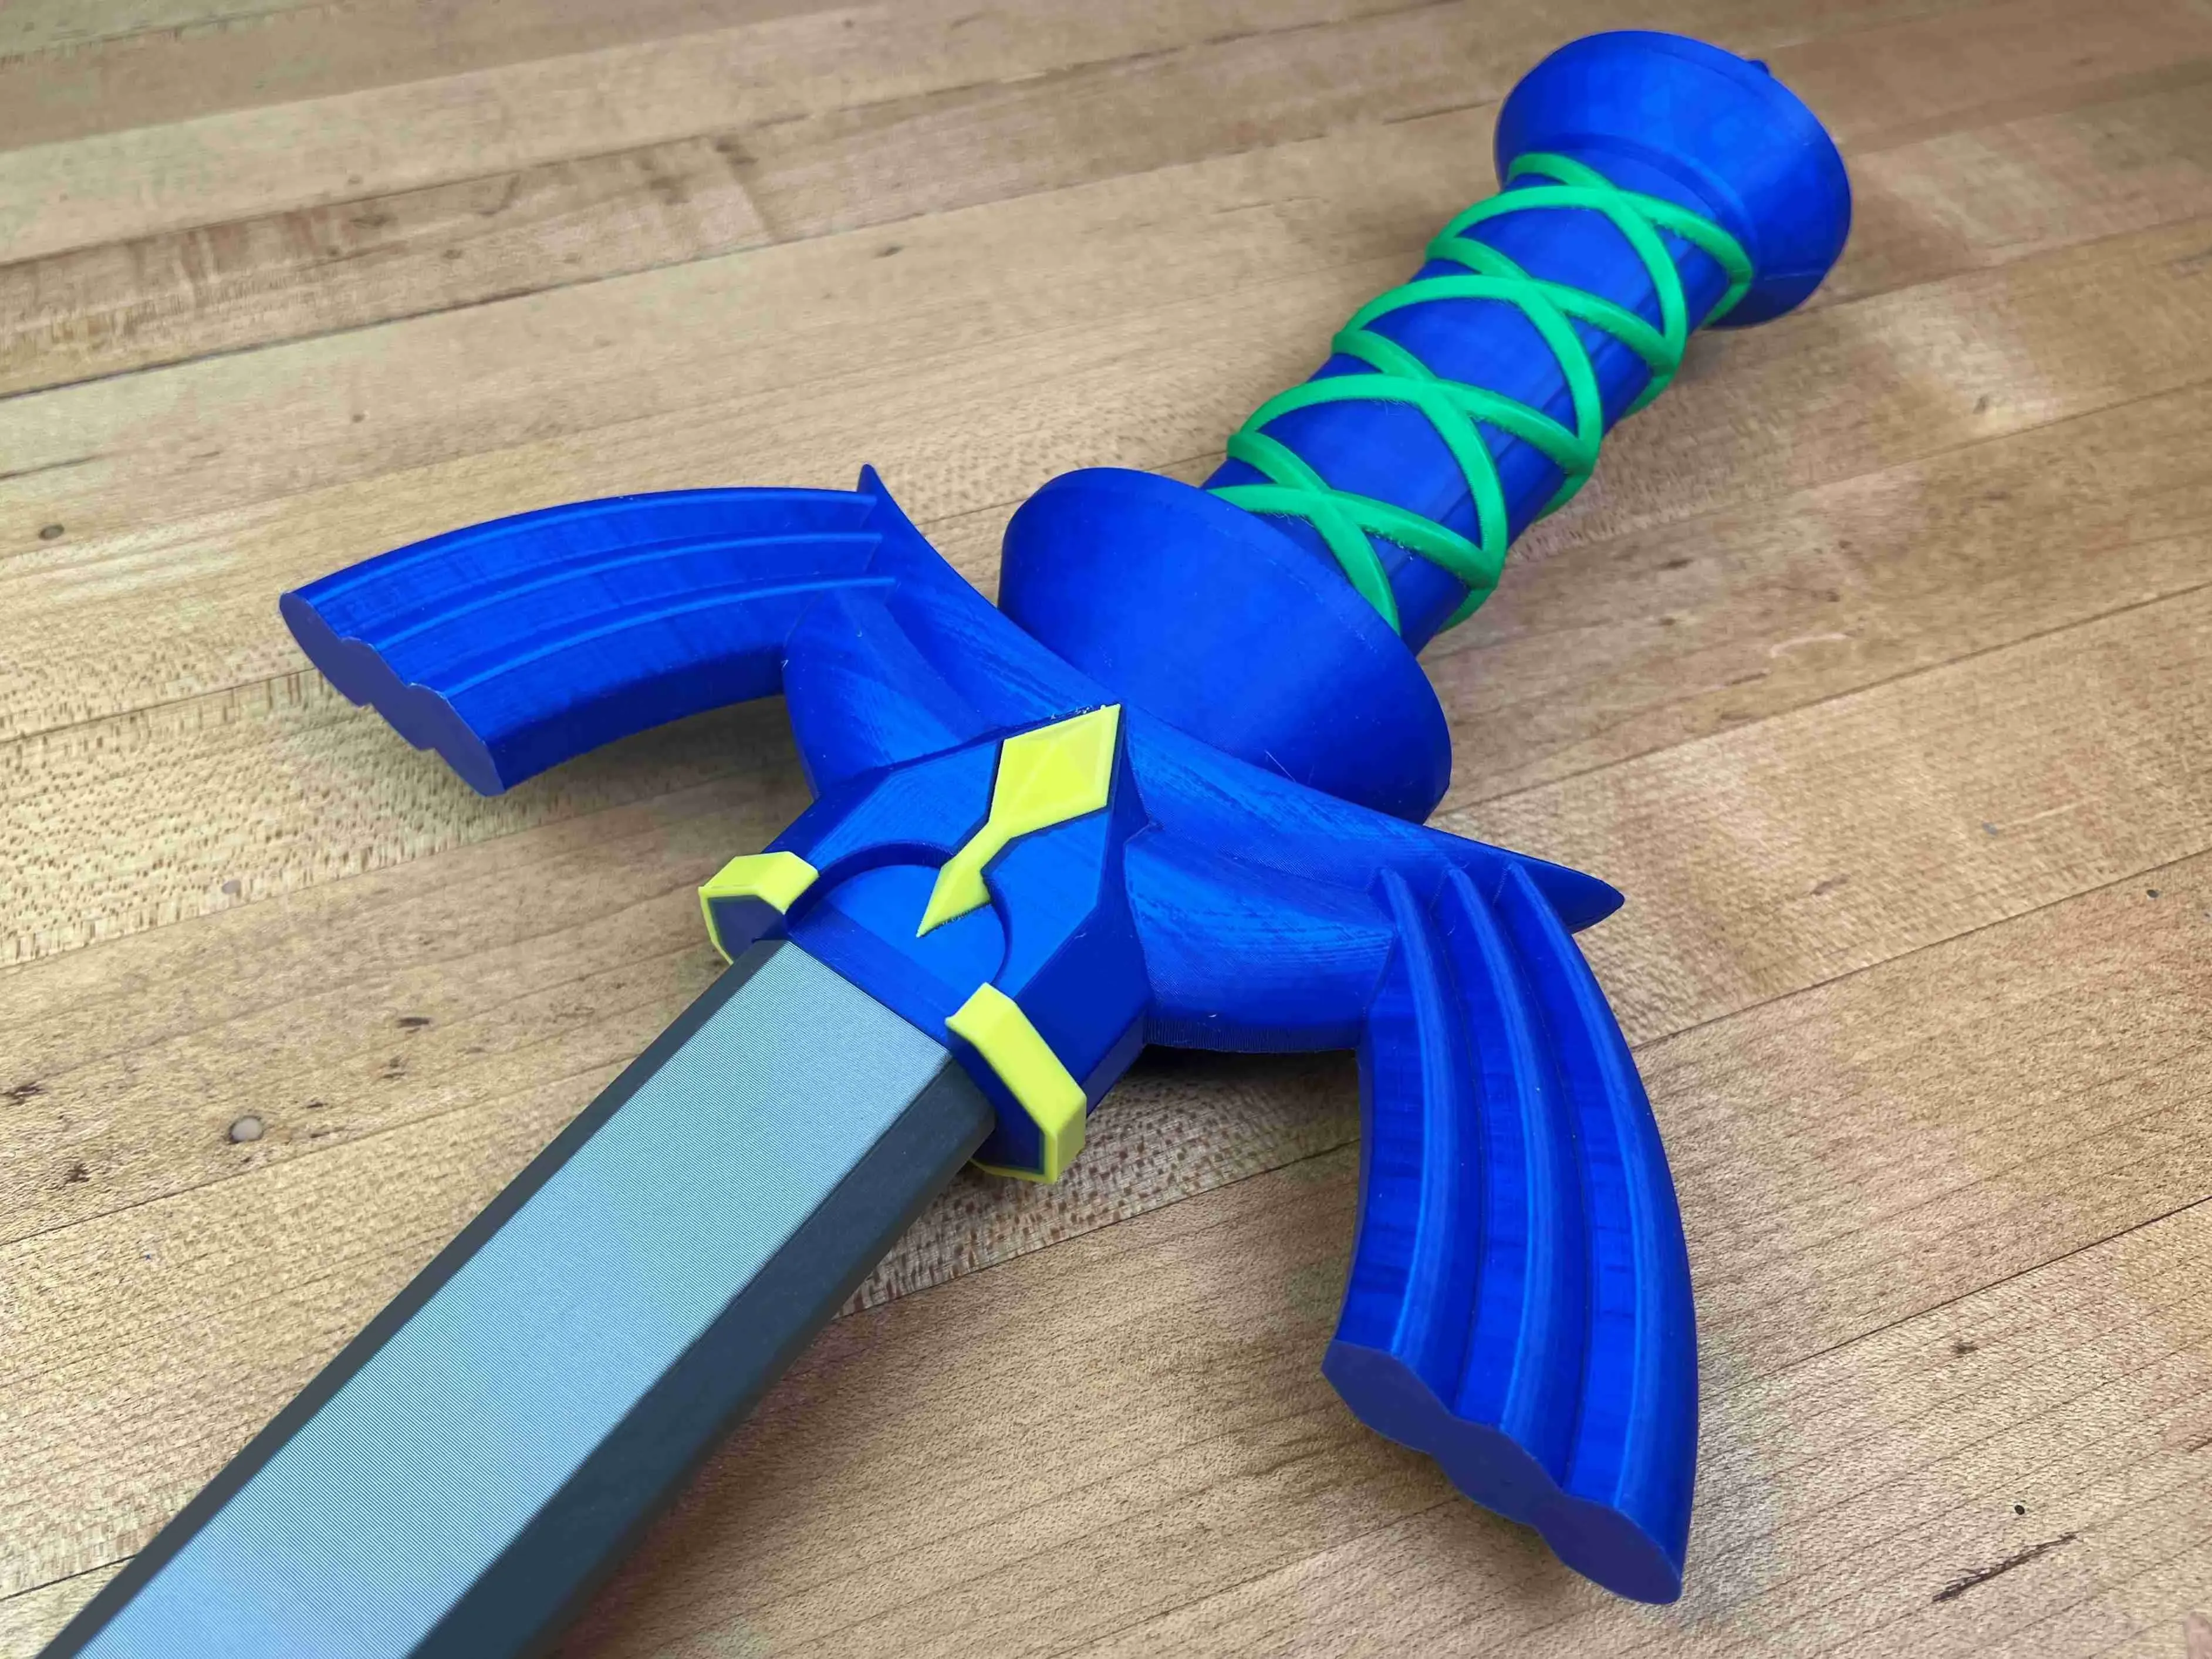 Collapsing Master Sword Multi-Color